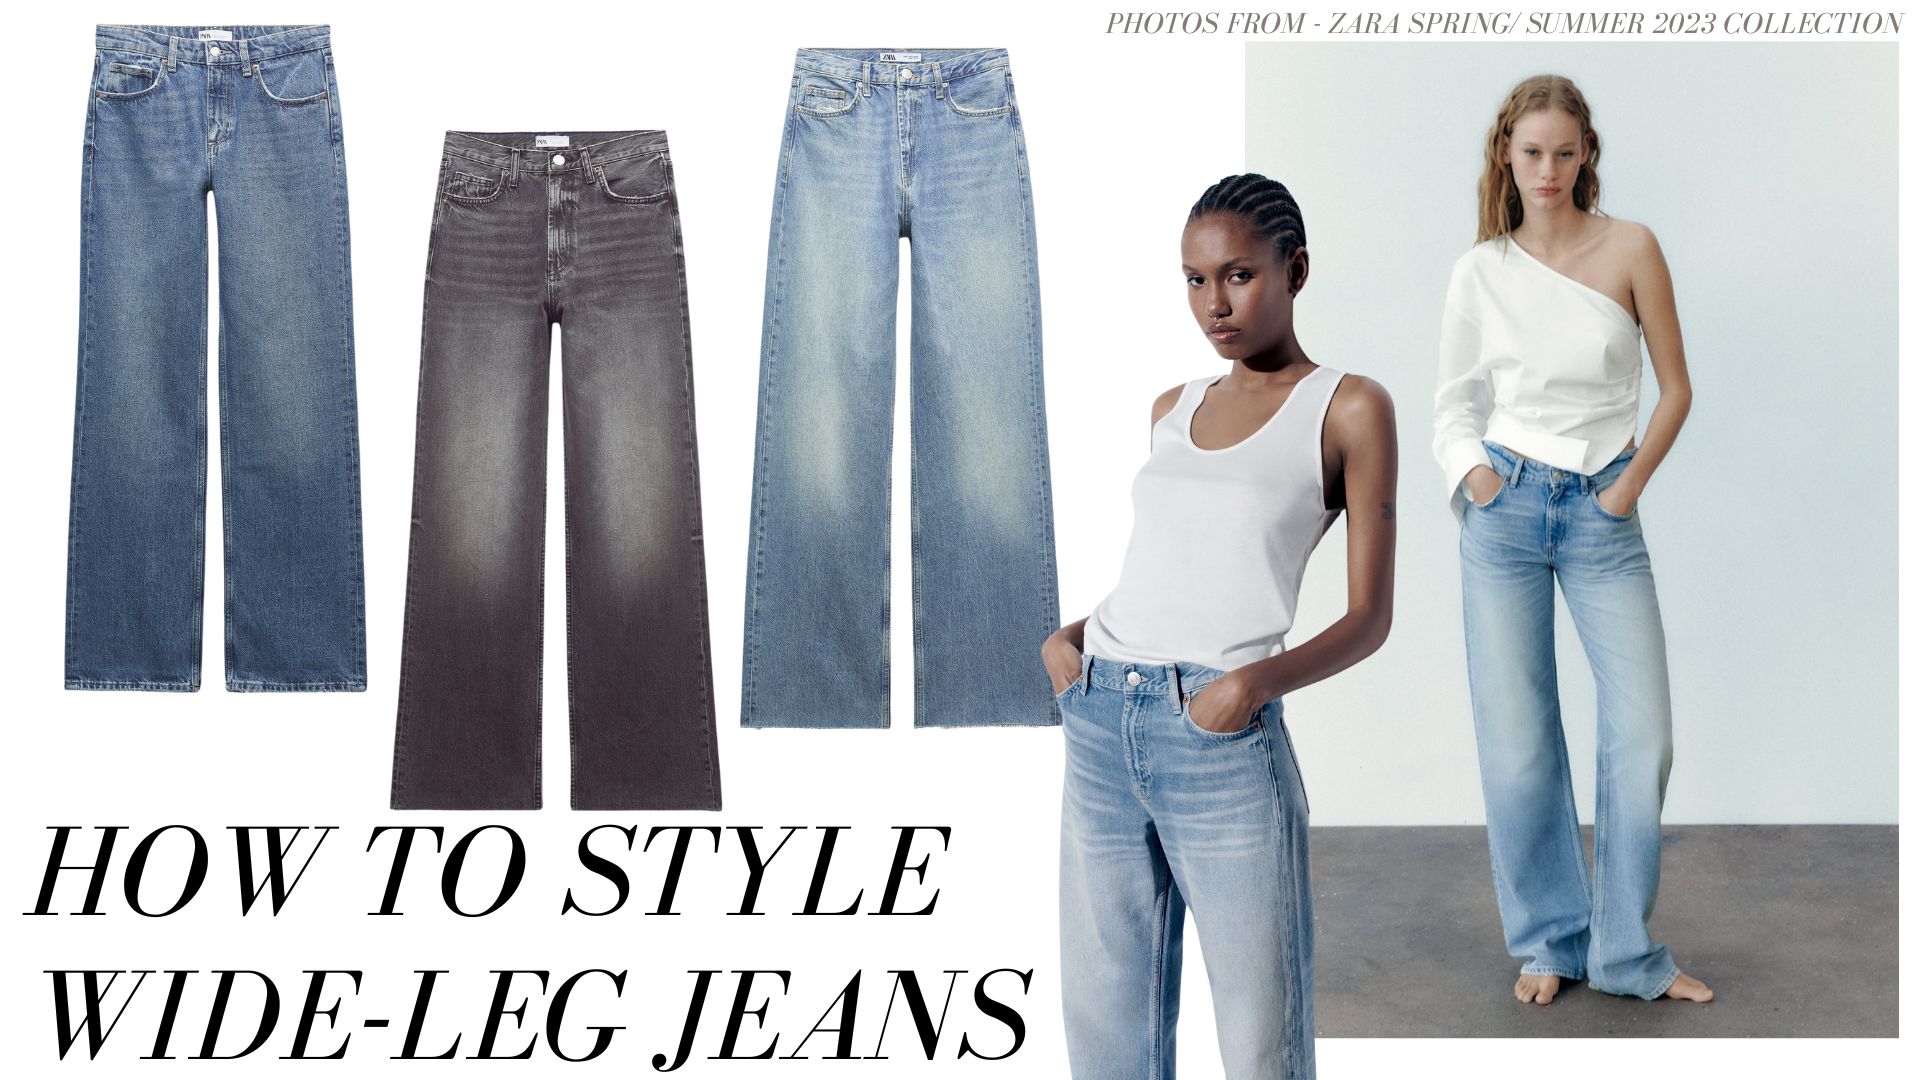 How to Style Wide Leg Jeans Like a Stylist - THE VANITY MAGAZINE